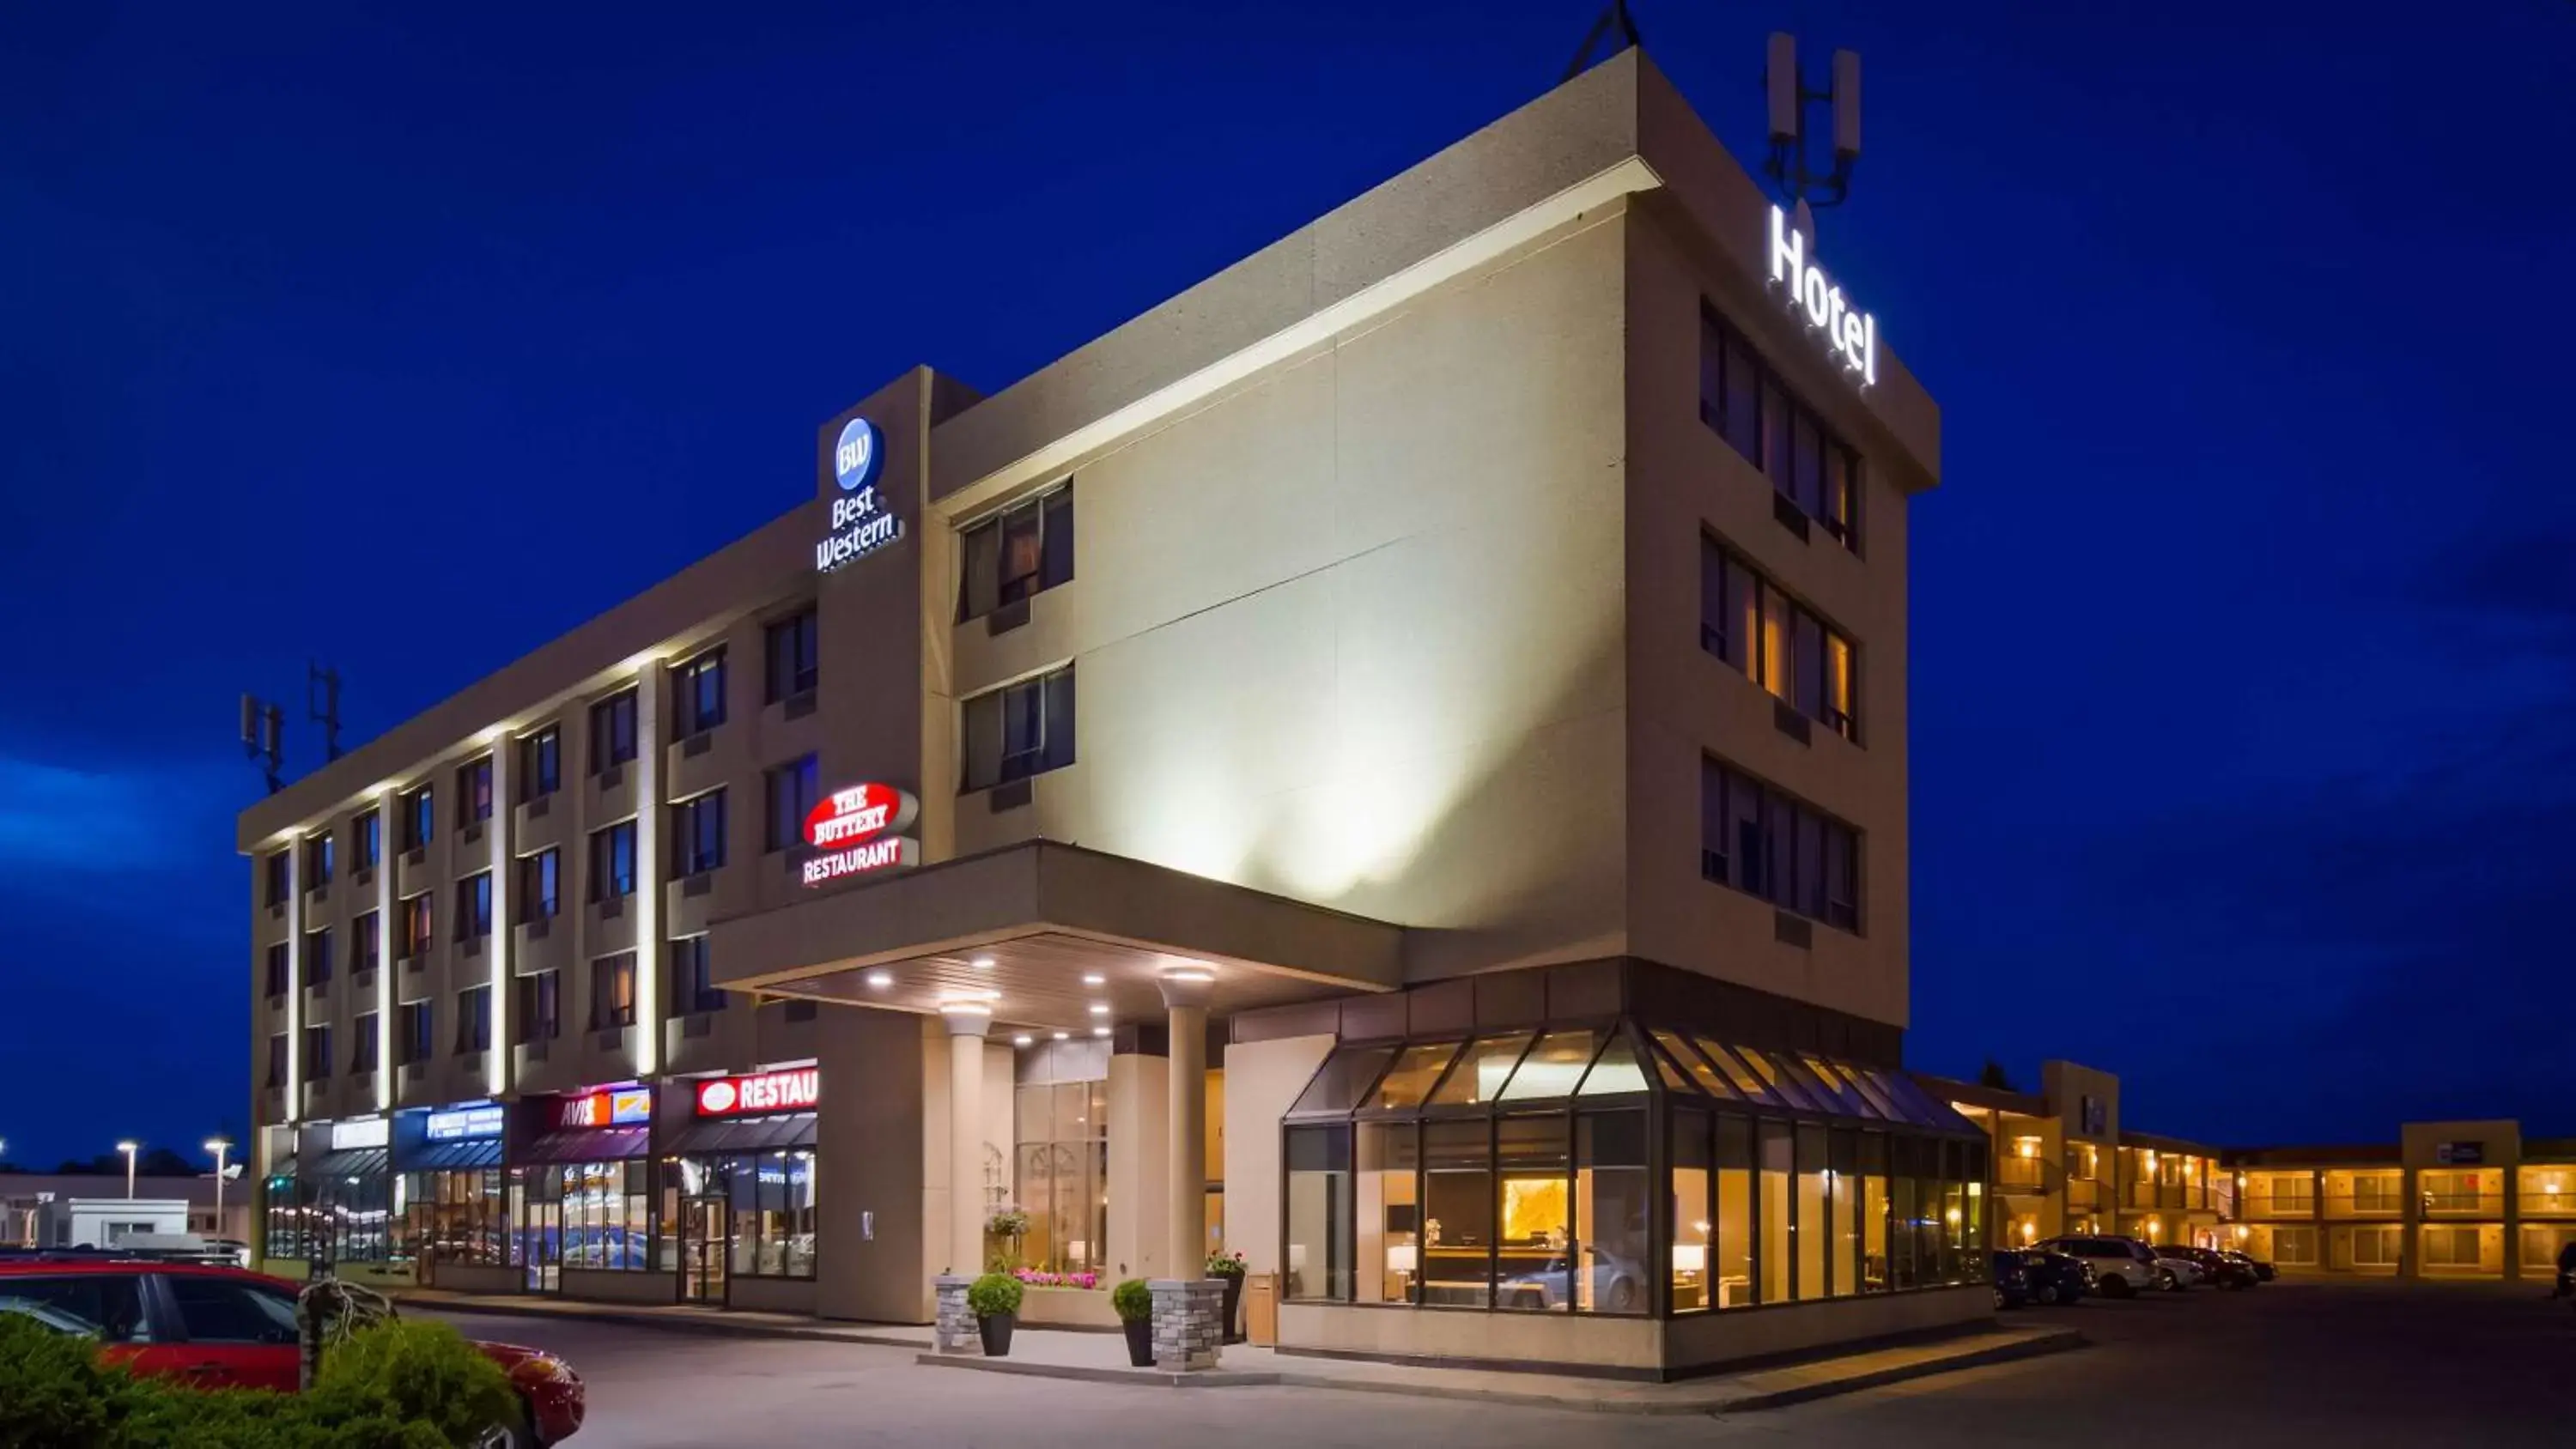 Property Building in Best Western Voyageur Place Hotel